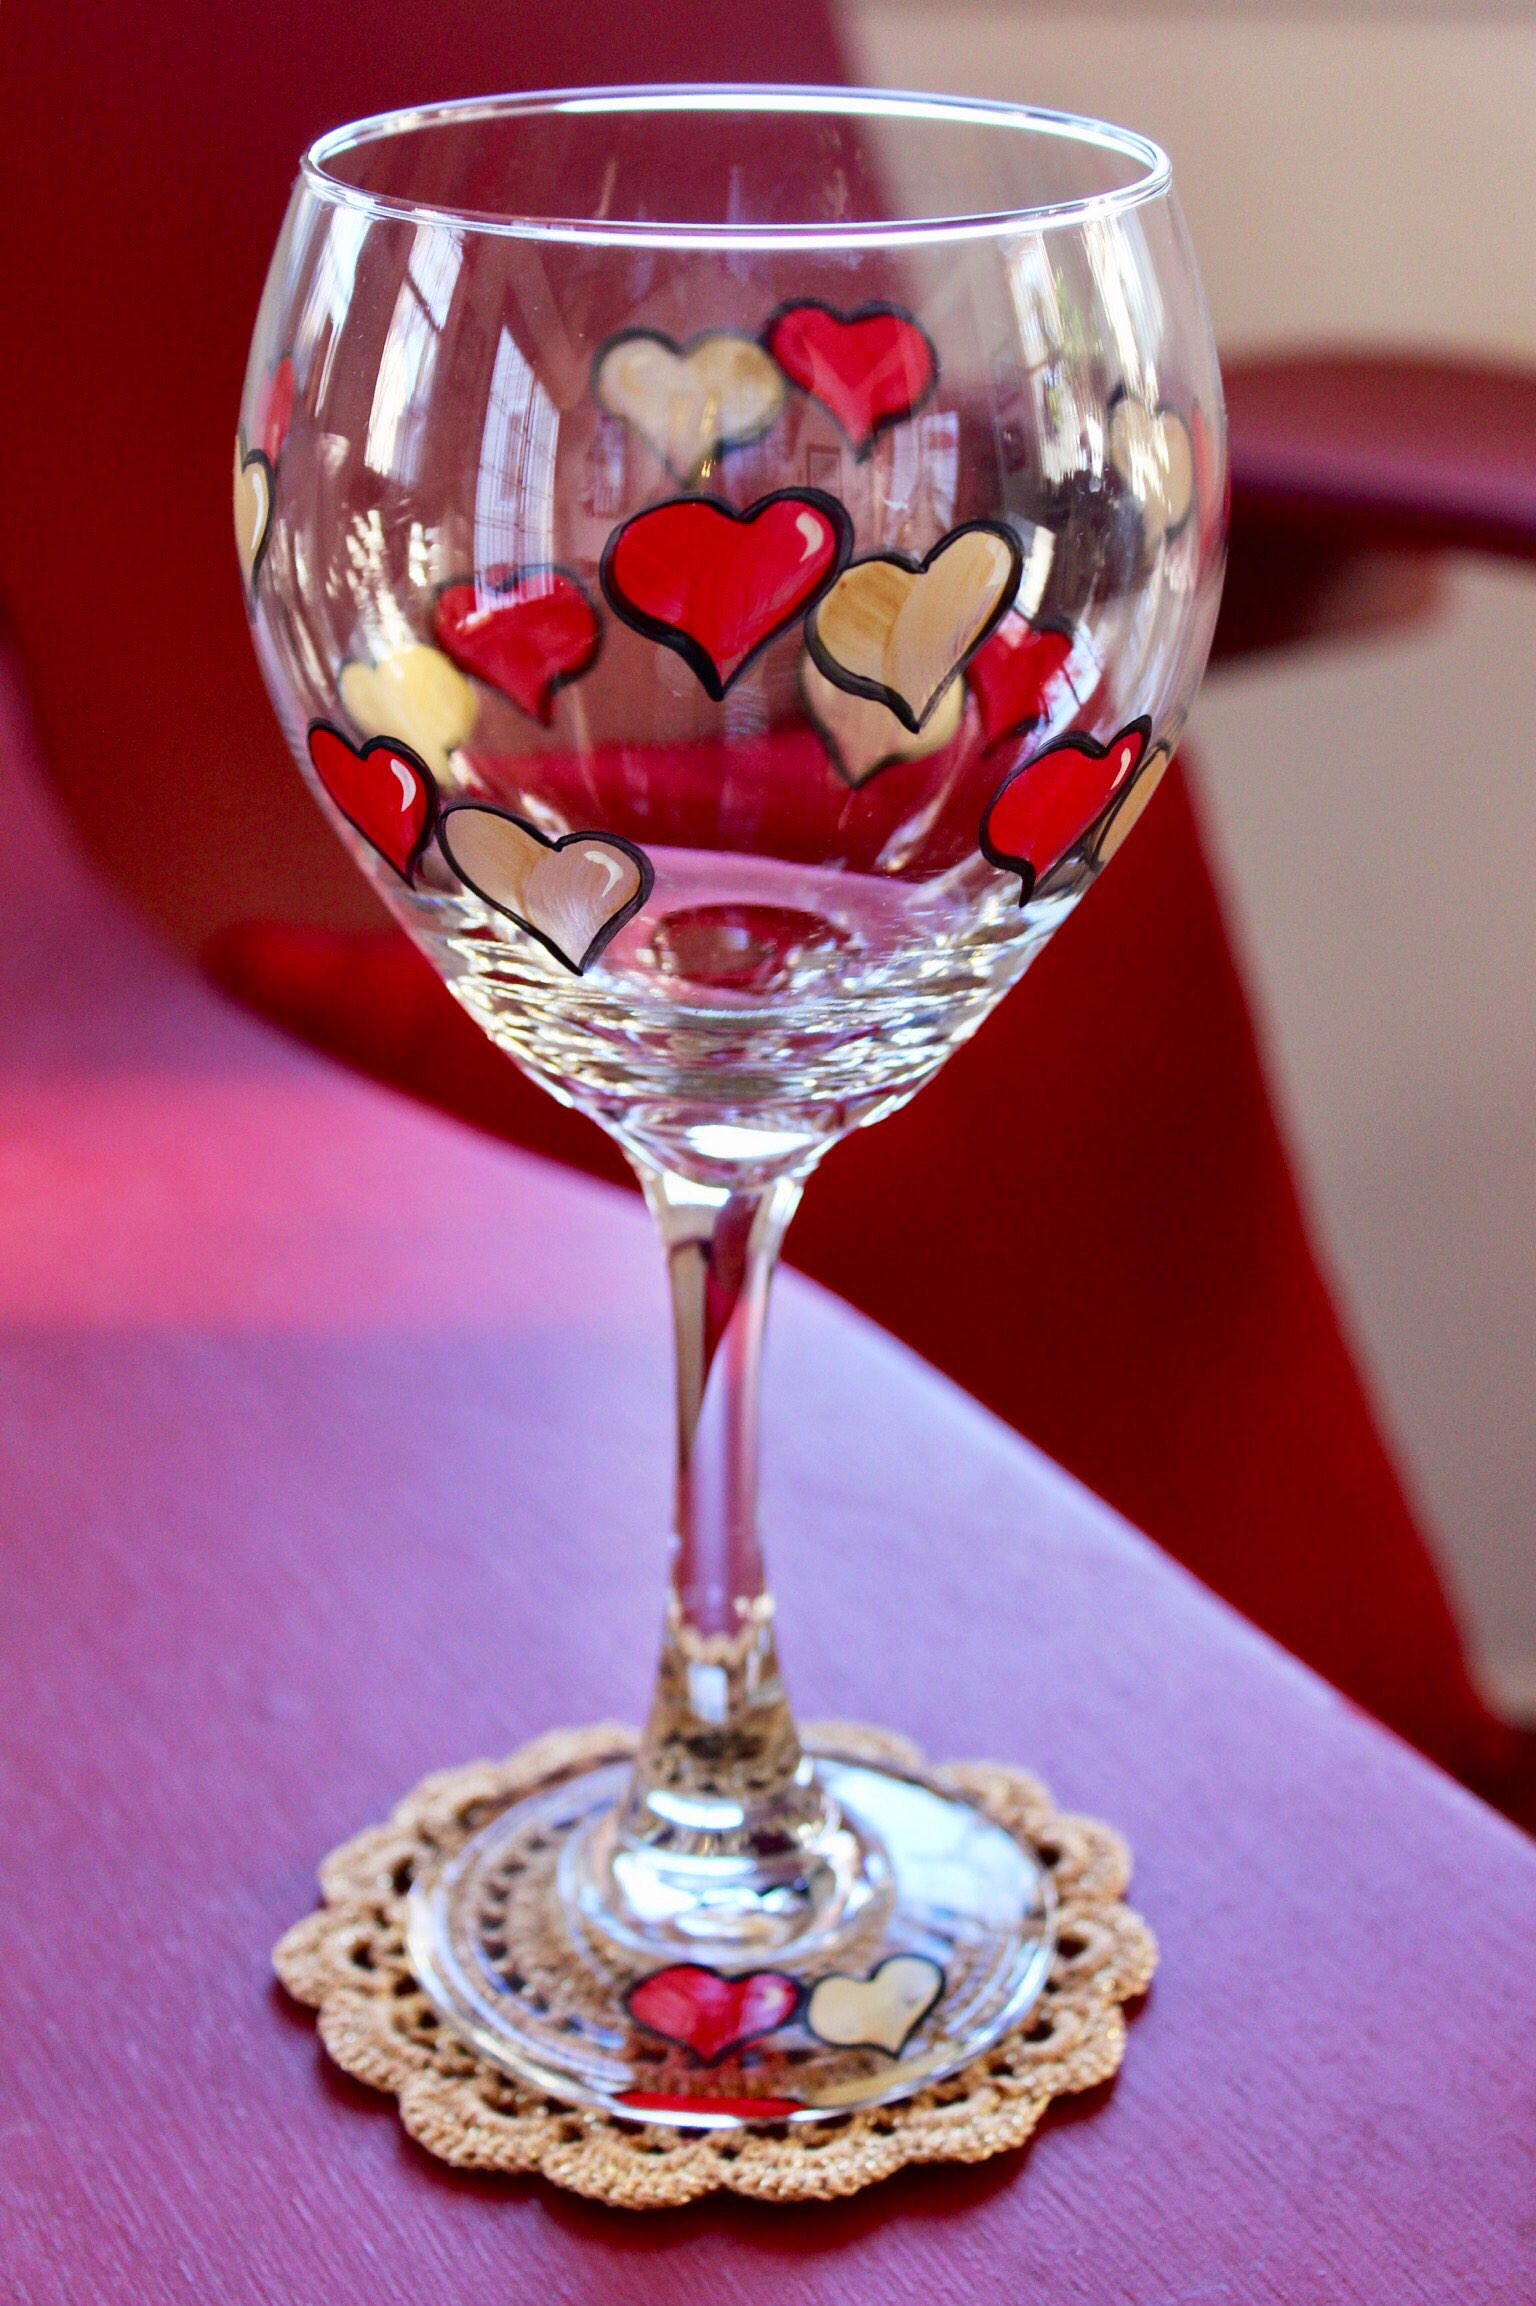 Valentine Heart Wine Glass Fancy Hearts Hand Painted Gift for Her  Anniversary, Valentine's Day, Birthday 